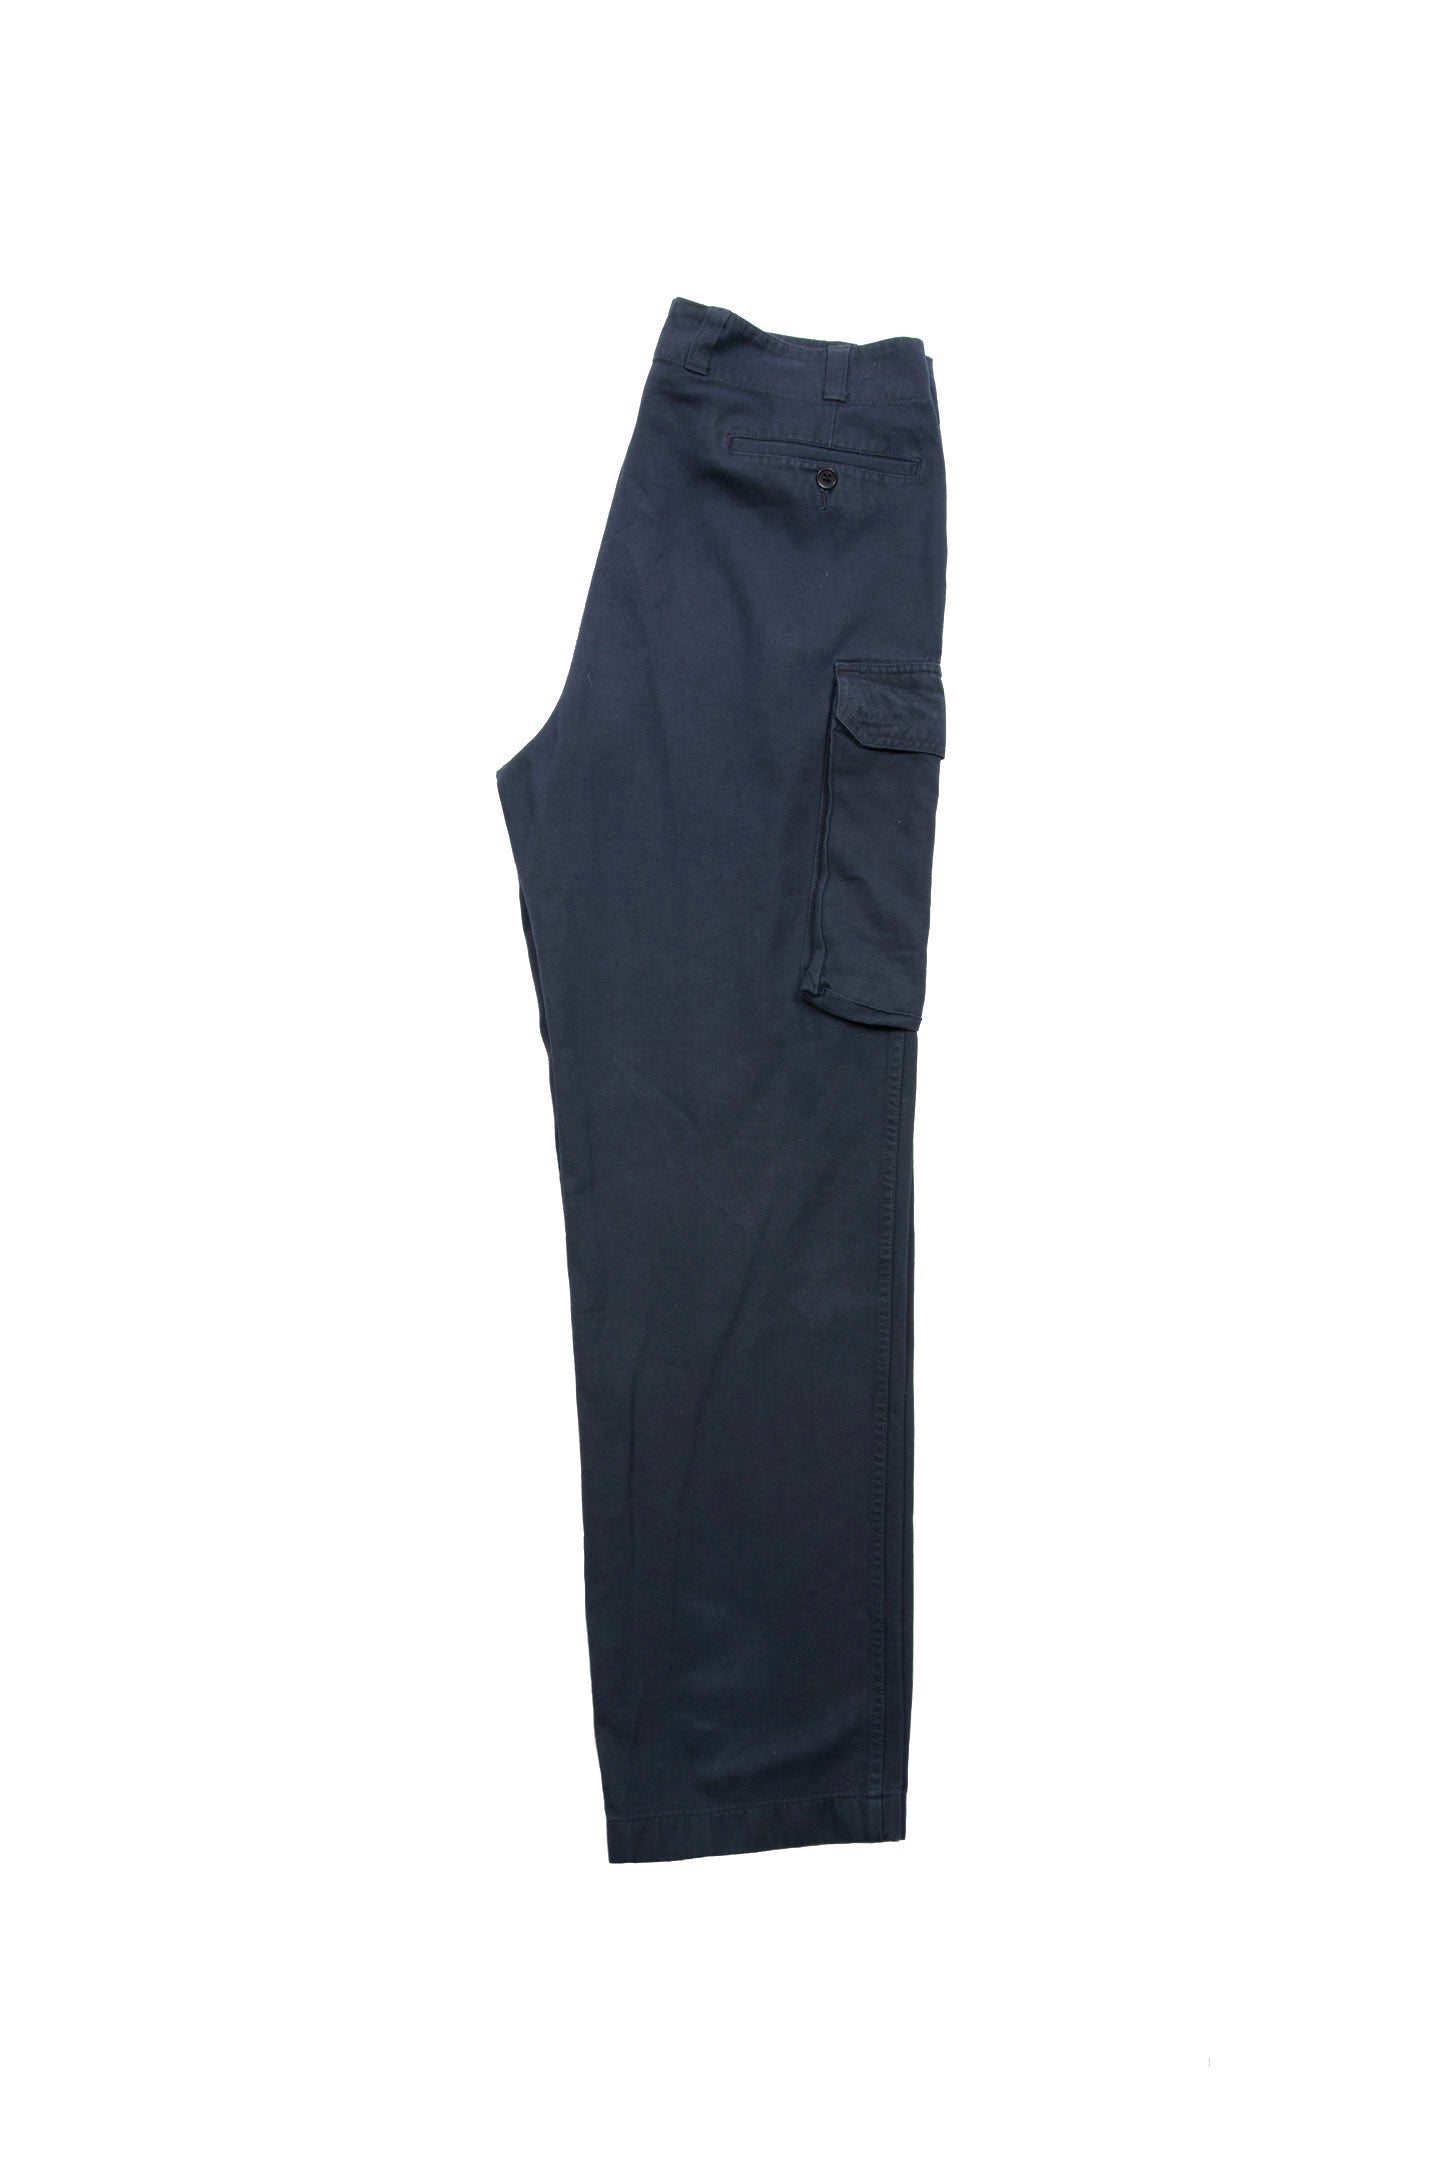 USED CARGO PANTS NAVY BLUE